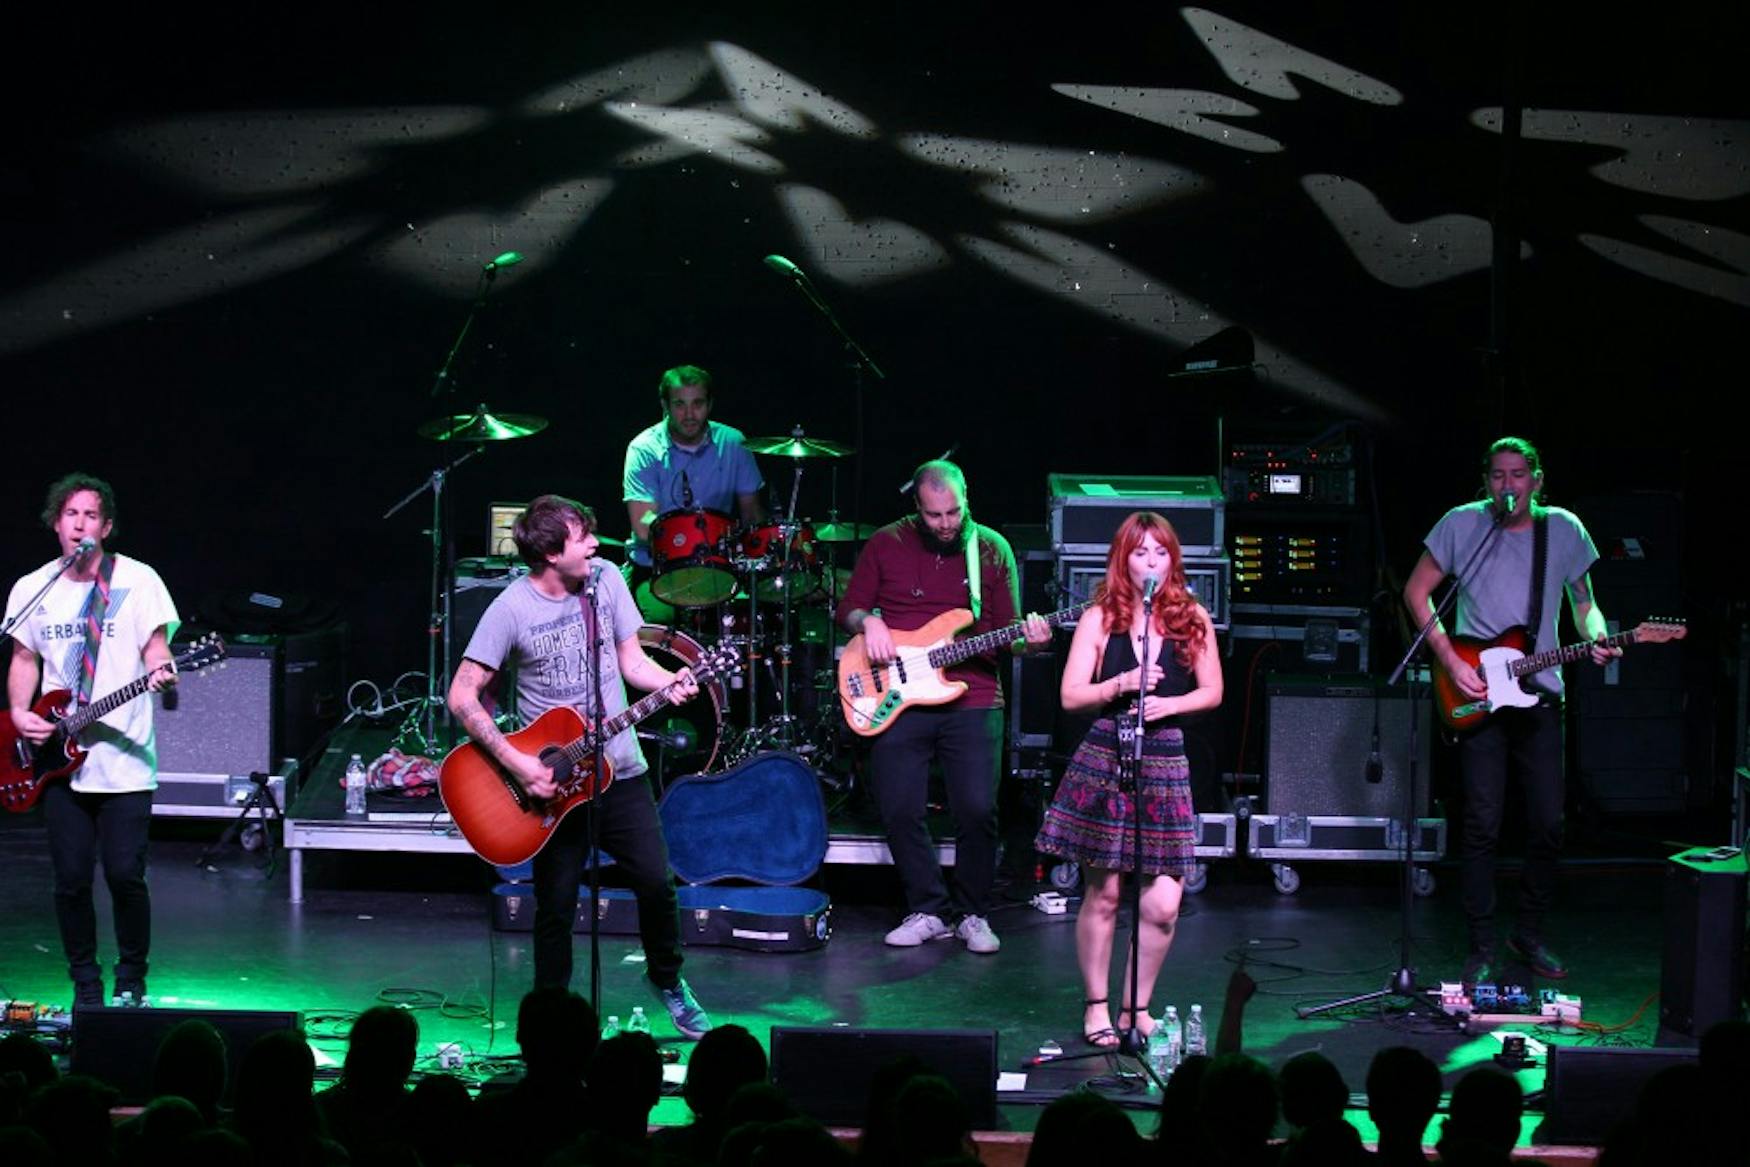 ROCKING OUT: Alternative-rock band The Mowgli’s performed at Student Events’ annual fall concert and played  their hits, including “San Fransisco,” “Say It, Just Say It” and “I’m Good.”